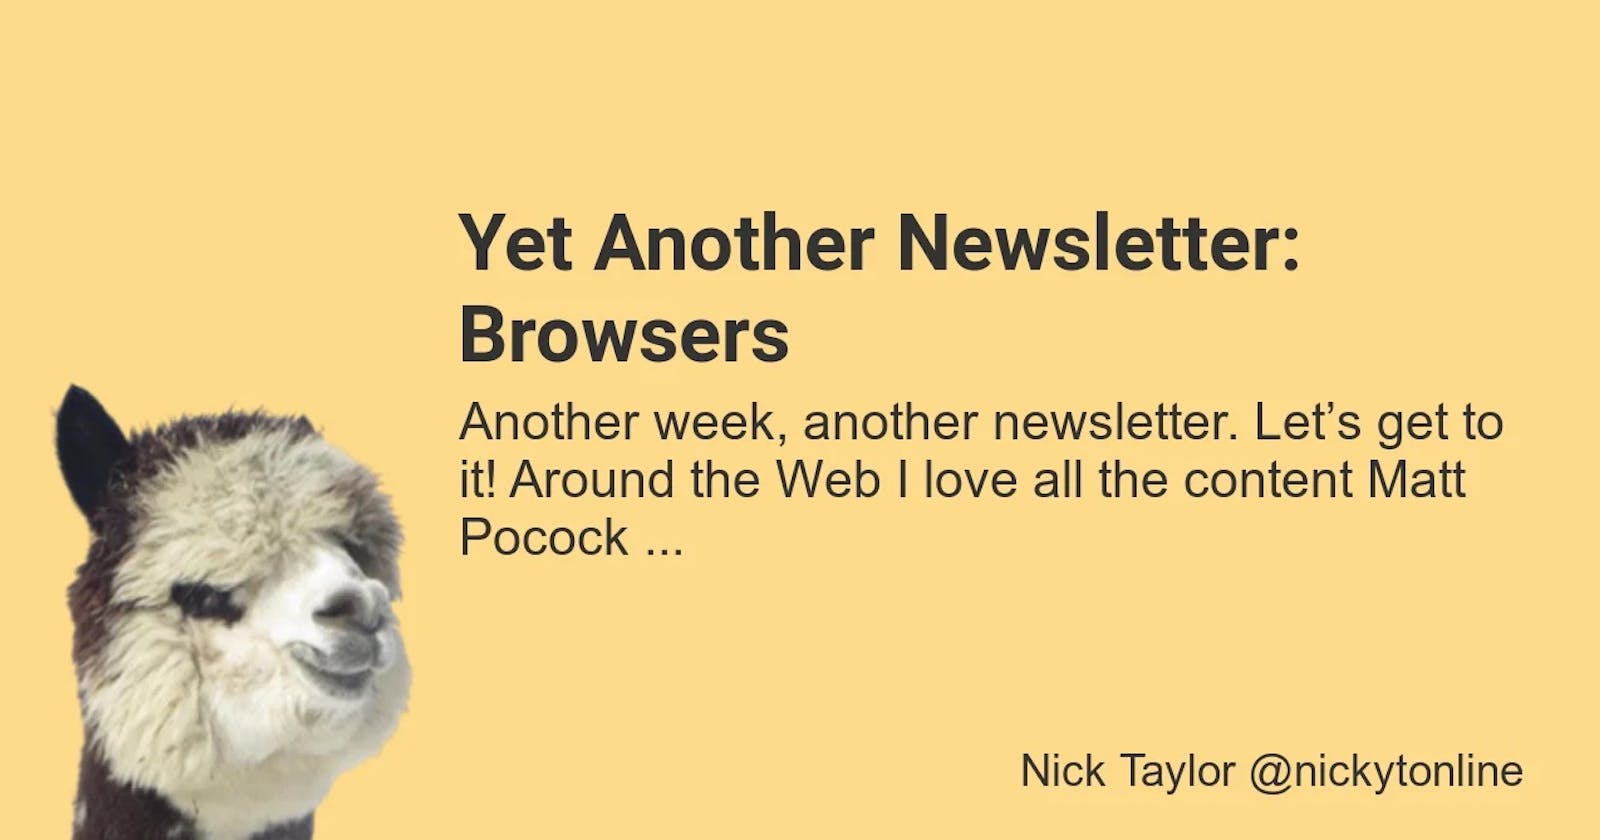 Yet Another Newsletter: Browsers